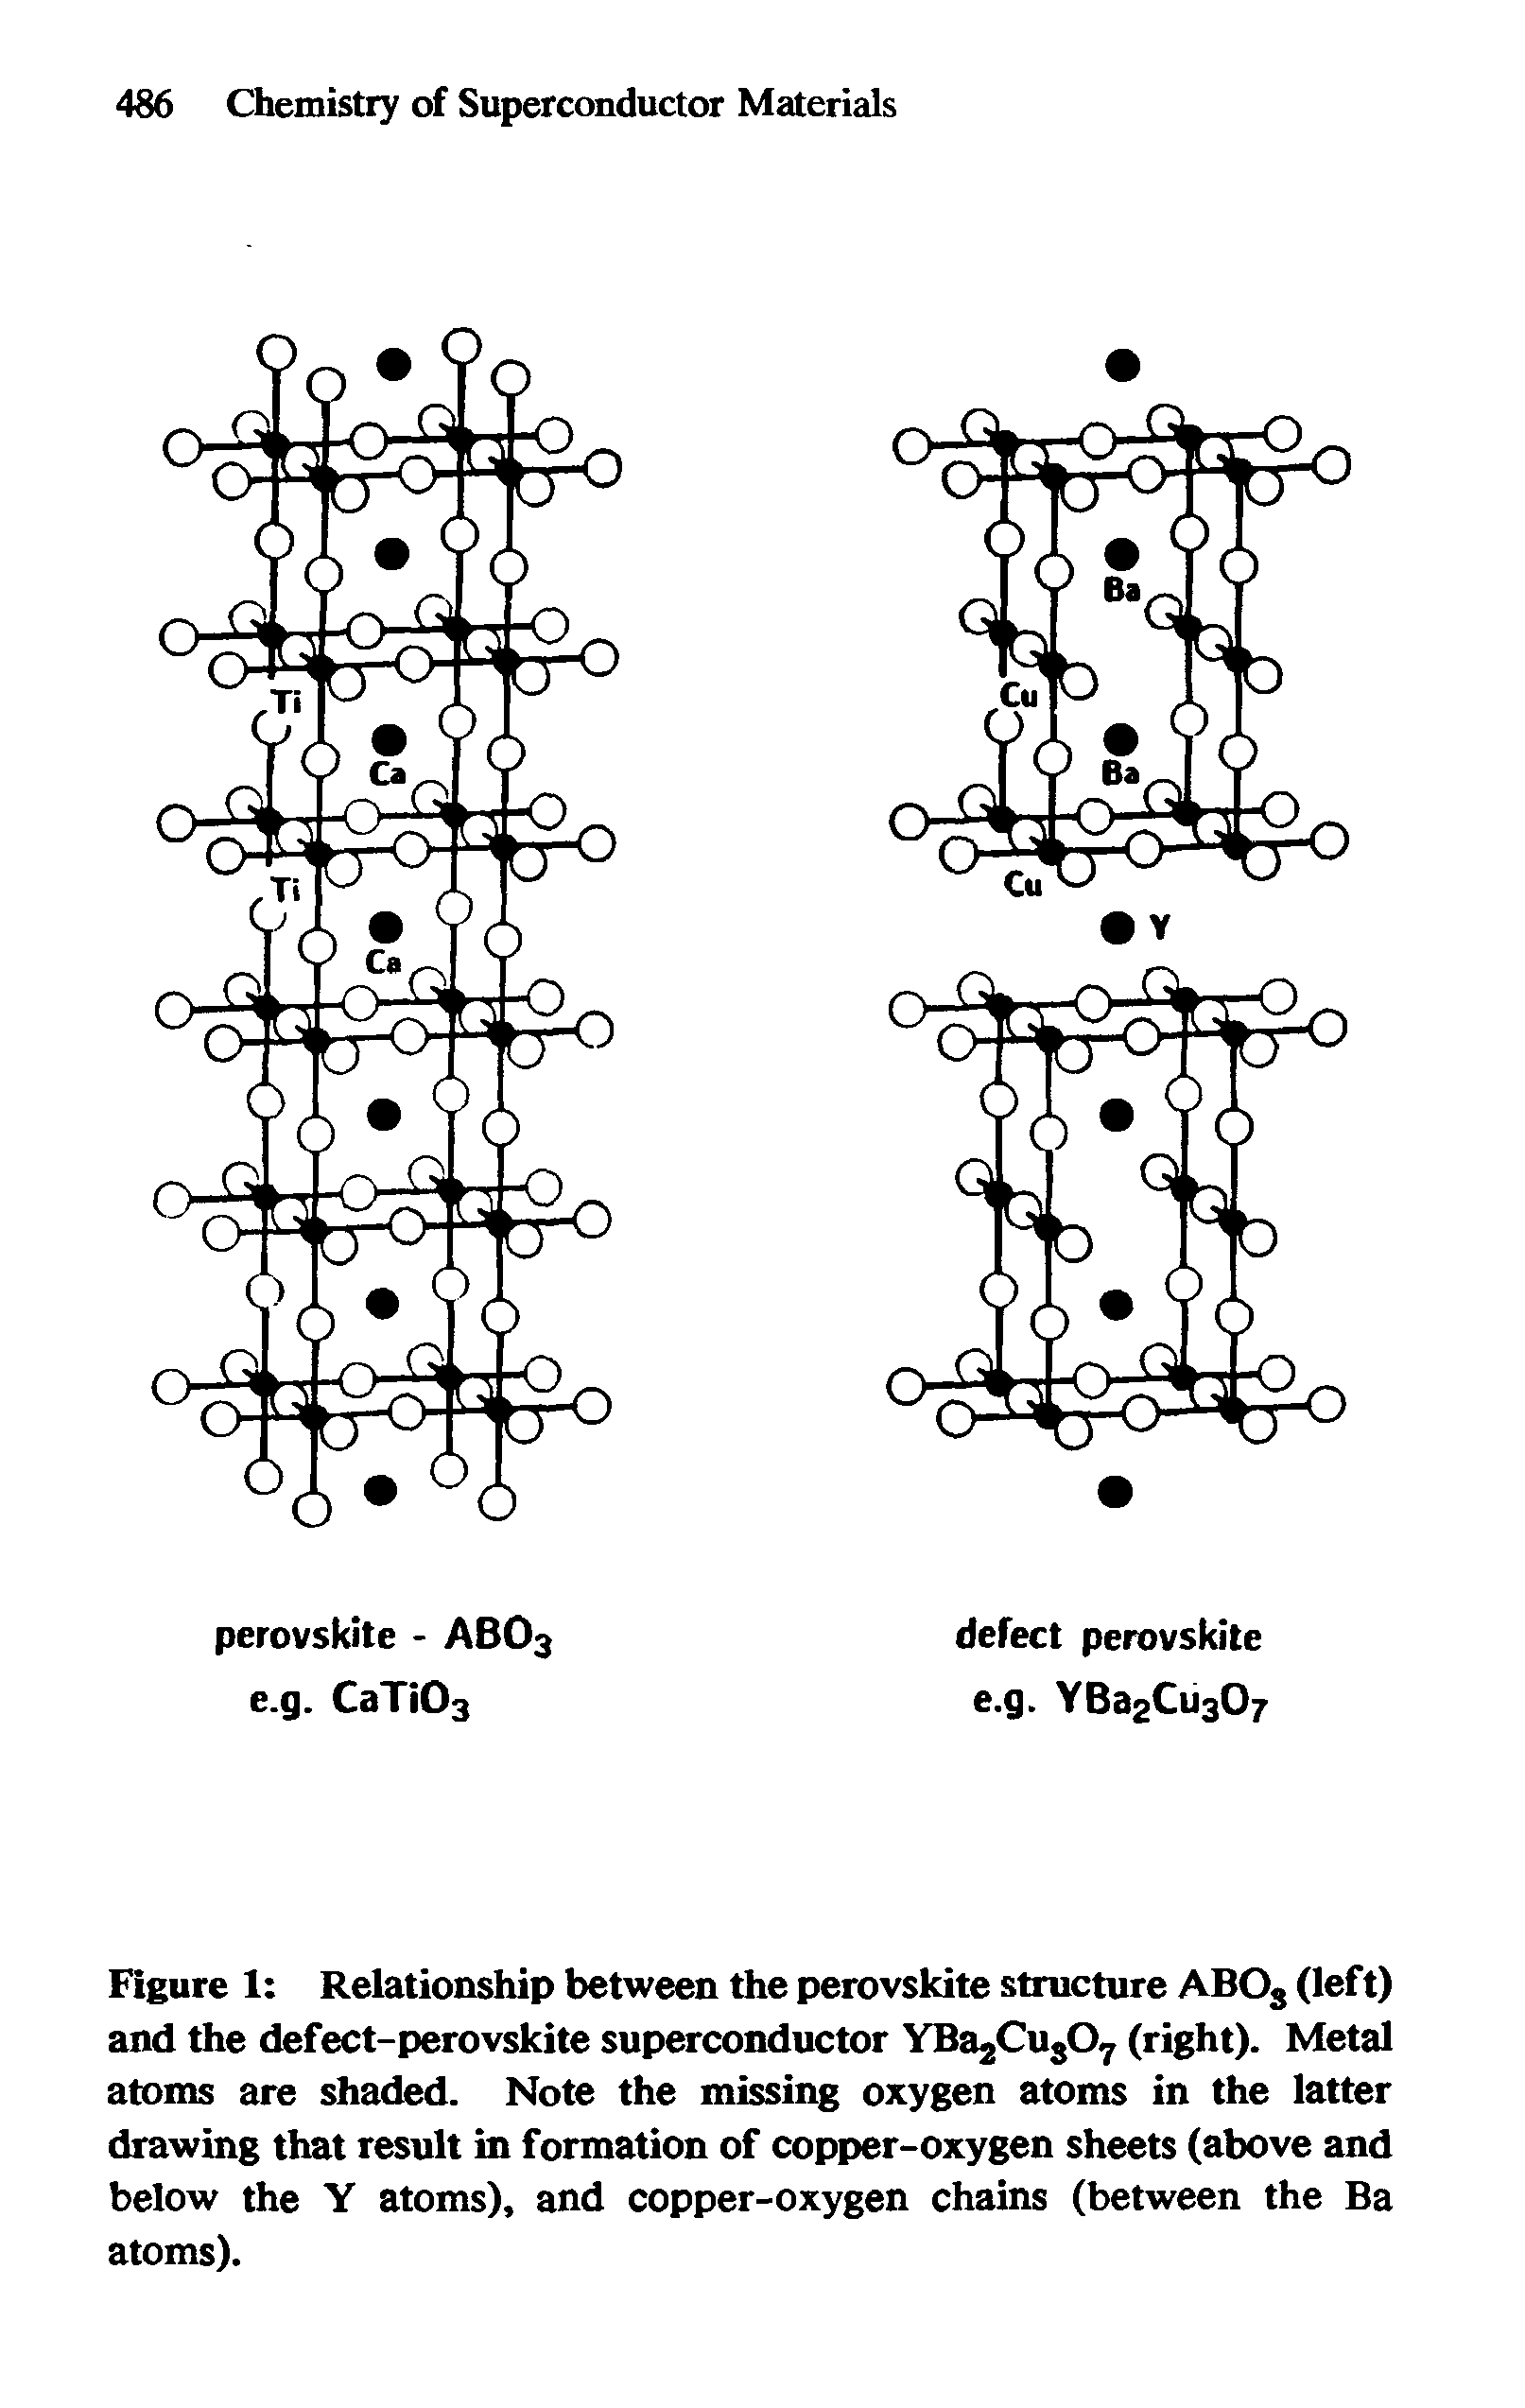 Figure 1 Relationship between the perovskite structure ABOs (left) and the defect-perovskite superconductor YBajCugOy (right). Metal atoms are shaded. Note the missing oxygen atoms in the latter drawing that result in formation of copper-oxygen sheets (above and below the Y atoms), and copper-oxygen chains (between the Ba atoms).